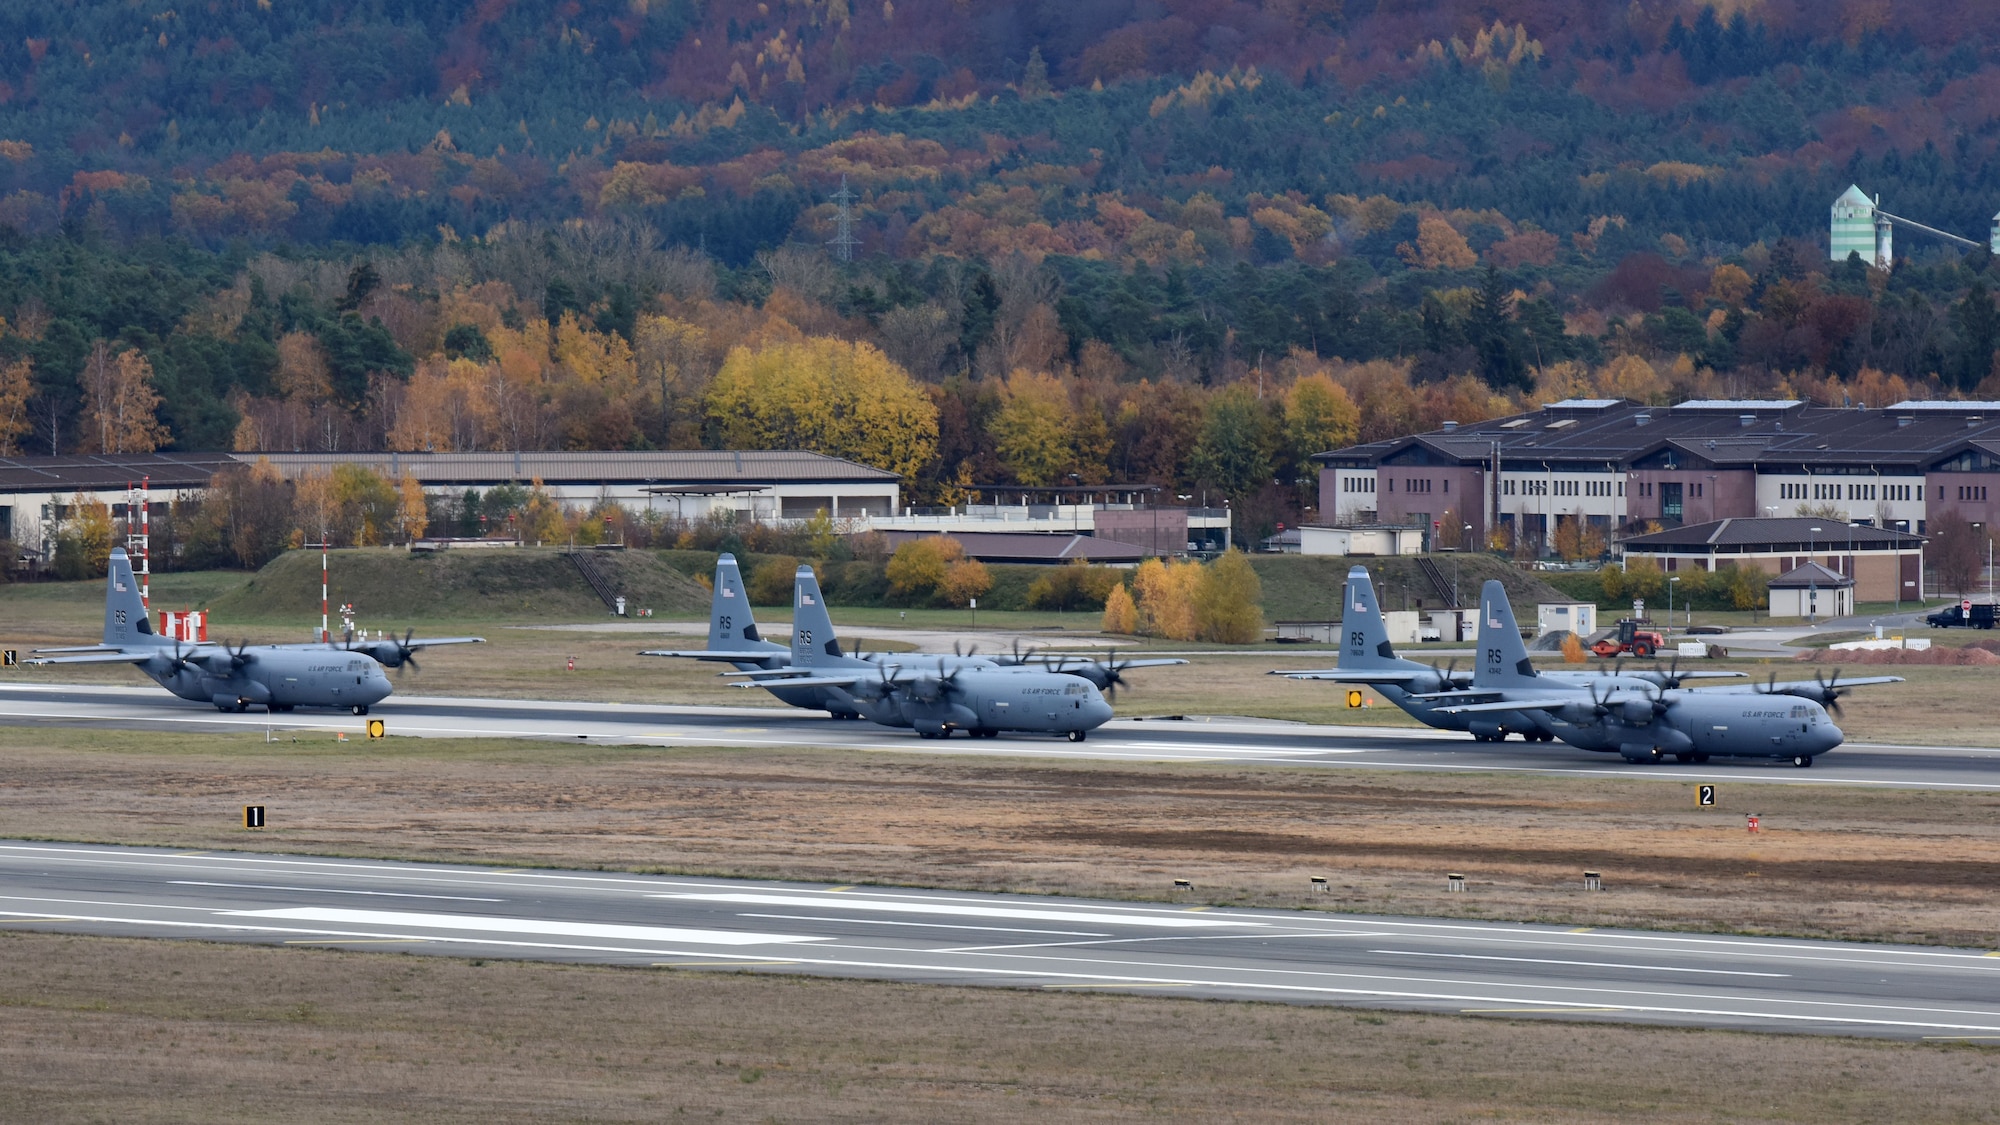 U.S. Air Force C-130J Super Hercules aircraft line up on the runway for an elephant walk on Ramstein Air Base, Germany, Nov. 8, 2018. The elephant walk was part of a mass generation exercise held by the 86th Airlift Wing. (U.S. Air Force photo by Airman 1st Class Milton Hamilton)